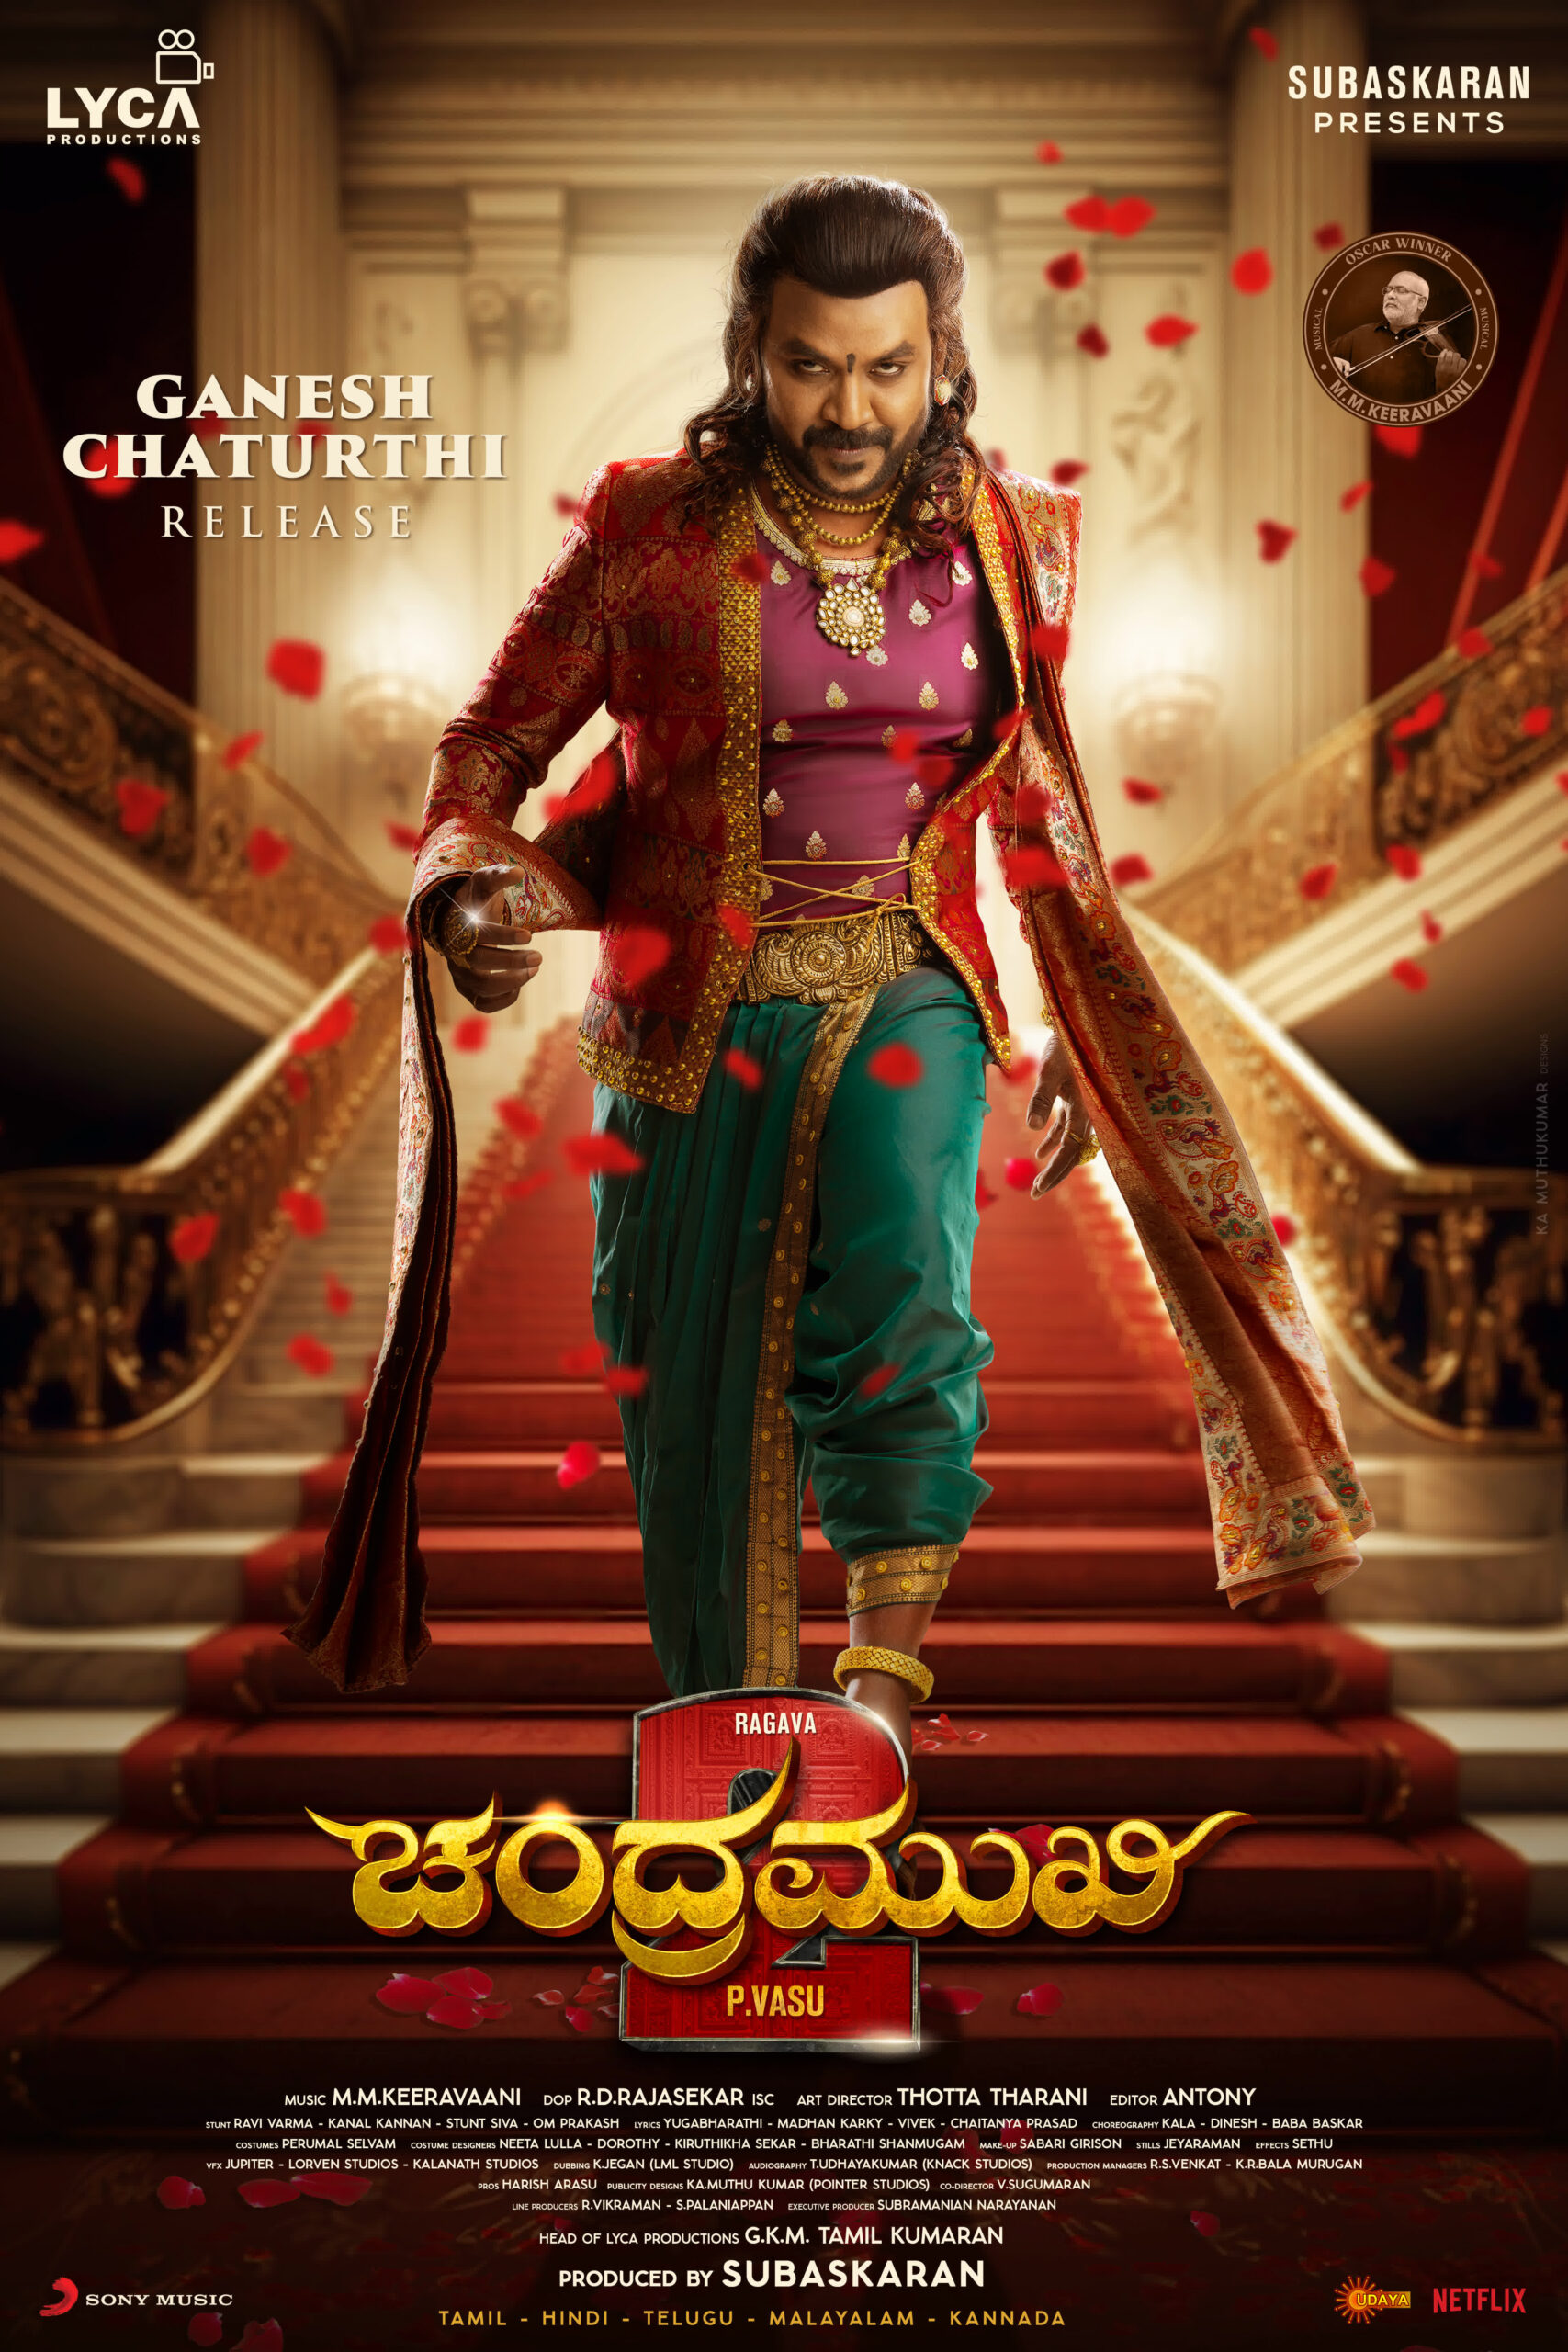 Thalaiva released the first look of the movie 'Chandramukhi-2'.